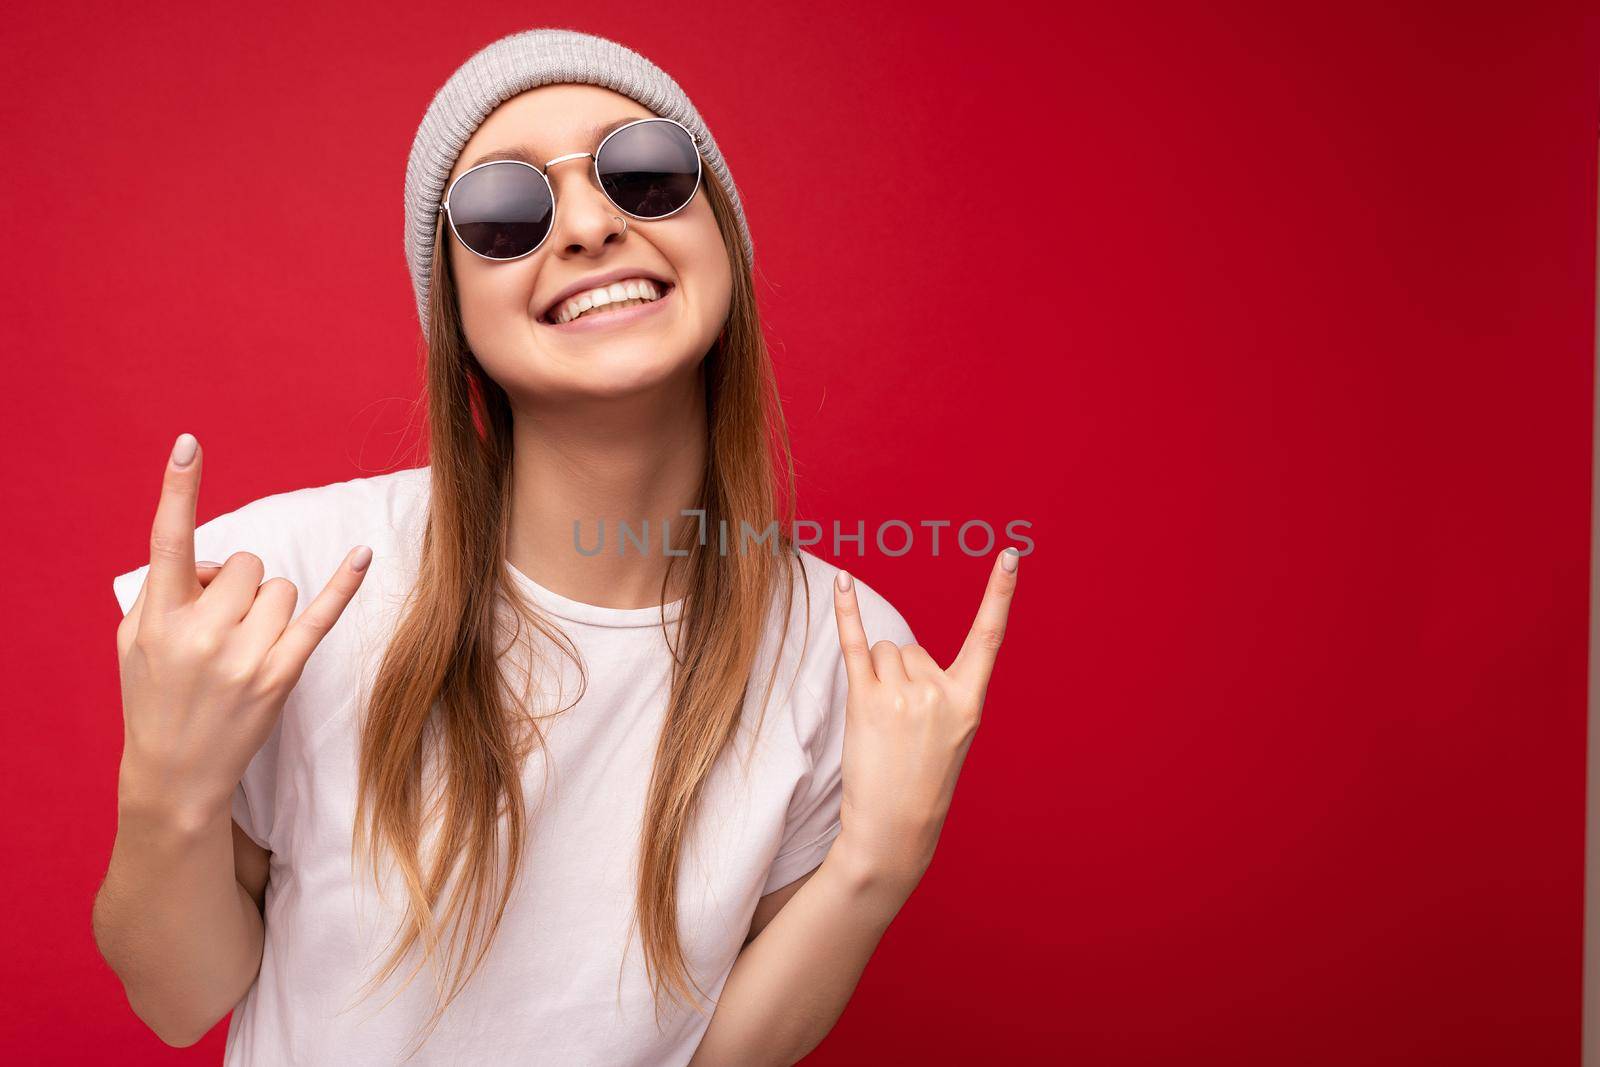 Closeup of young emotional positive happy smiling attractive dark blonde woman with sincere emotions wearing casual white t-shirt, gray hat and sunglasses isolated on red background with copy space and showing rock and roll gesture.